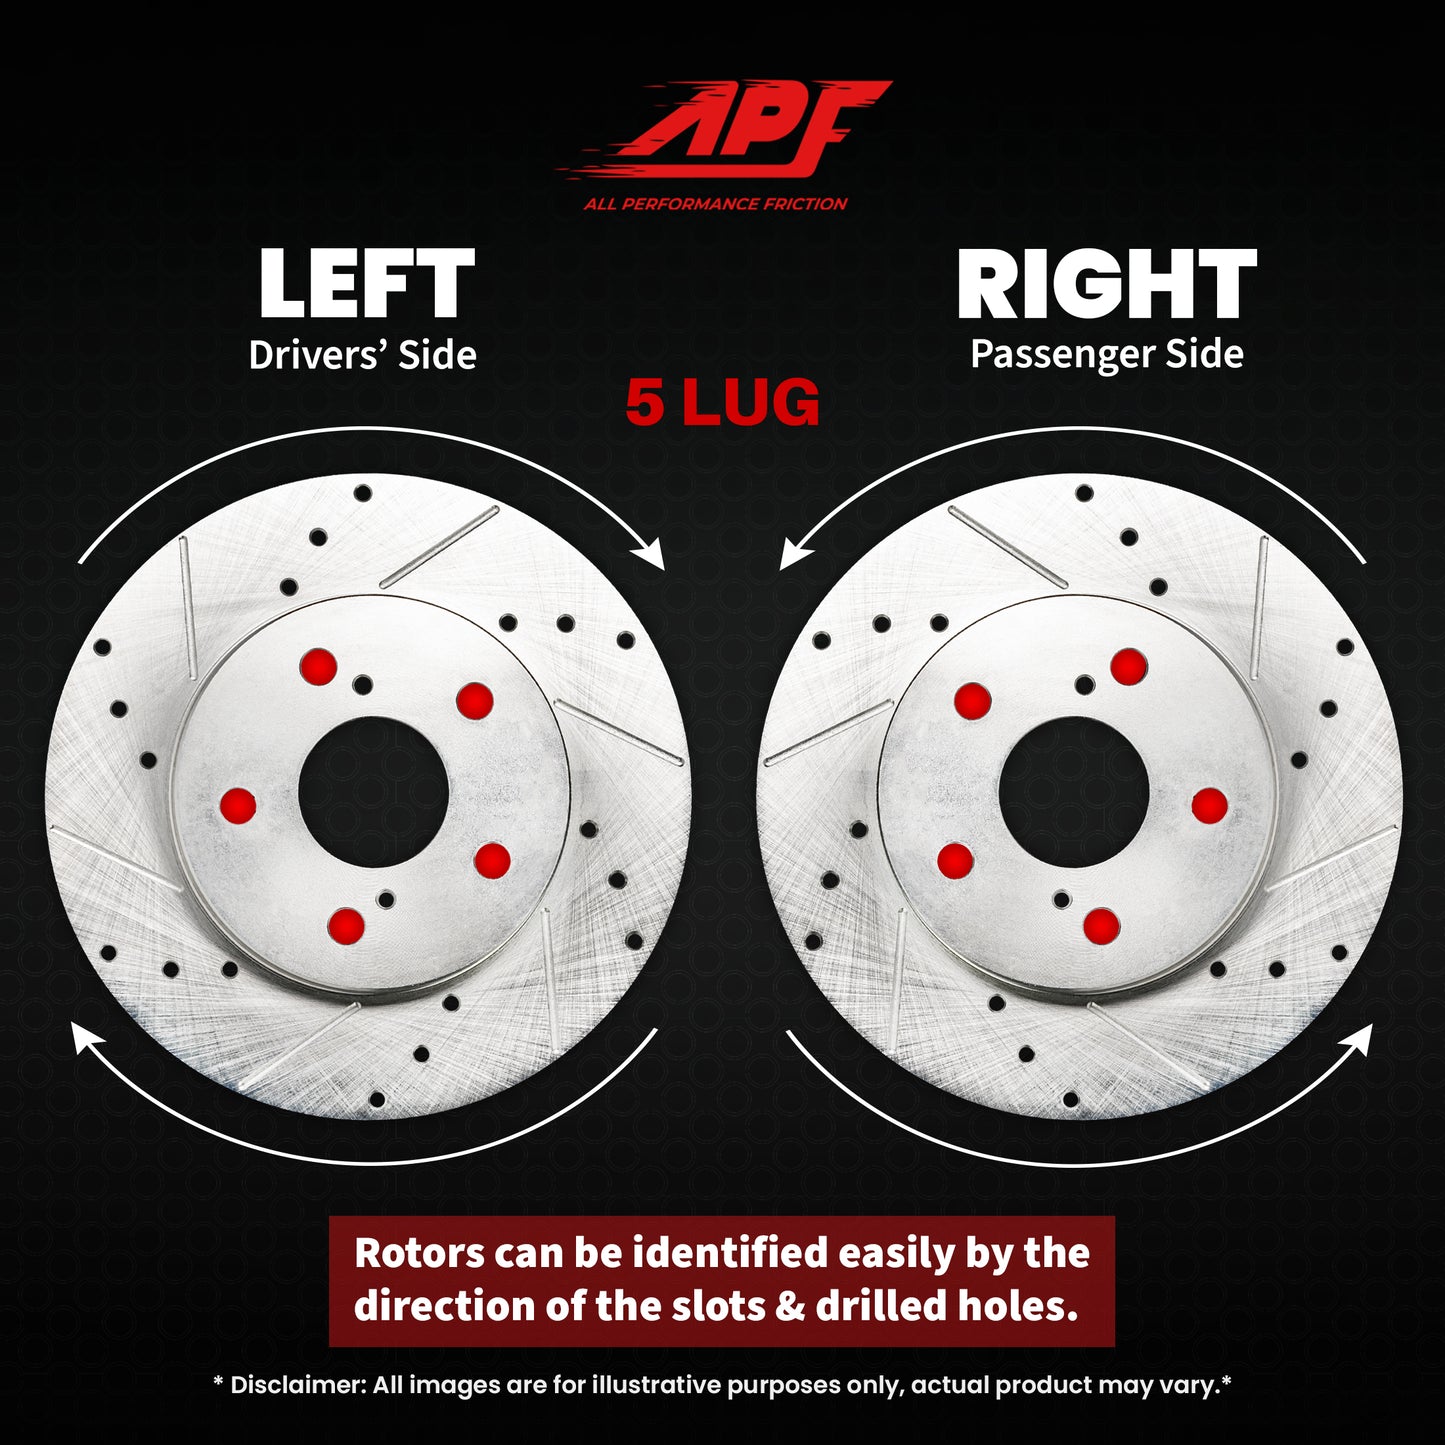 APF All Performance Friction Rear Rotors compatible with Toyota Corolla iM 2017-2018 Zinc Drilled Slotted Rotors | $114.58